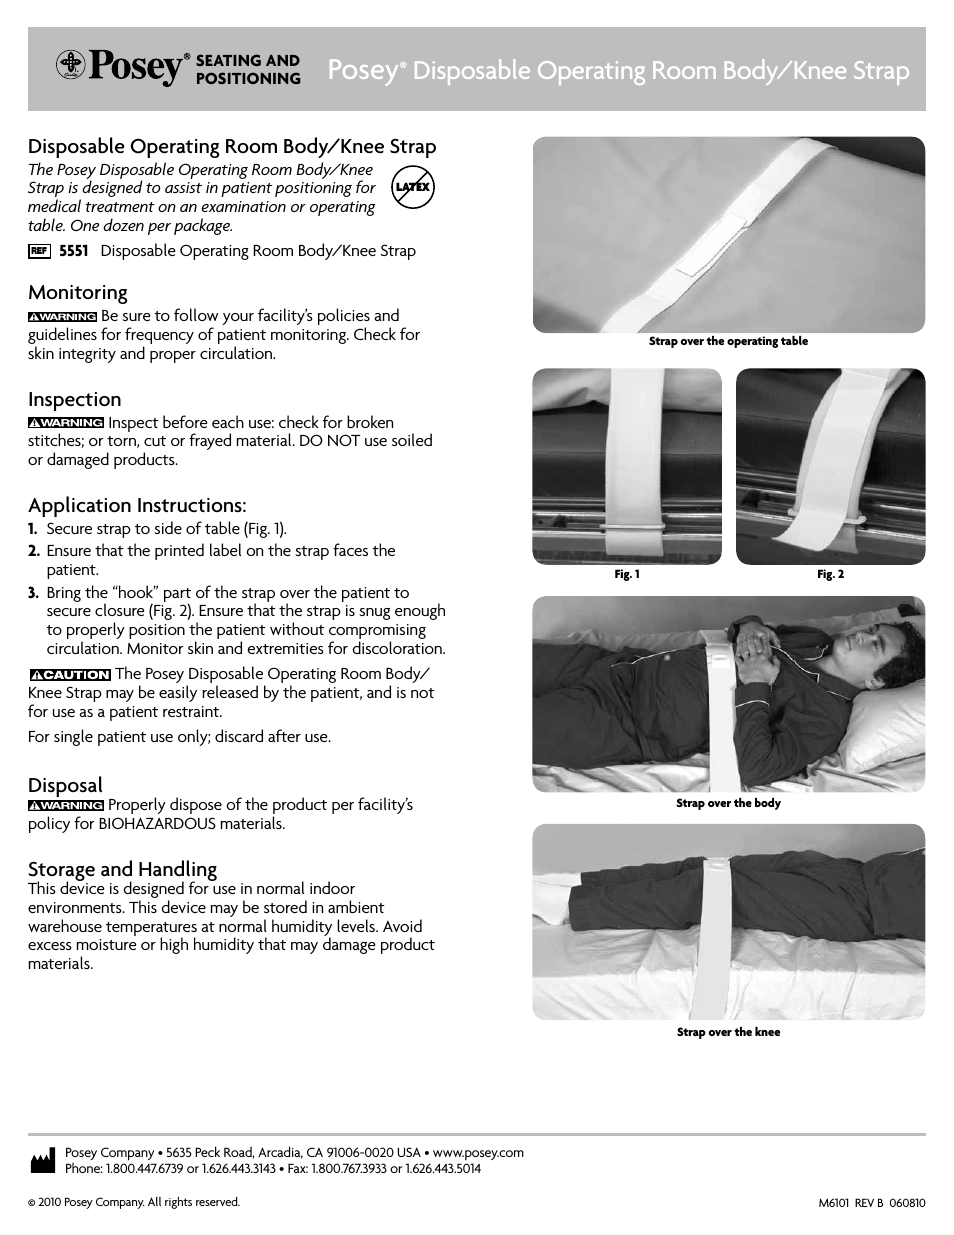 Disposable Operating Room Body/Knee Strap